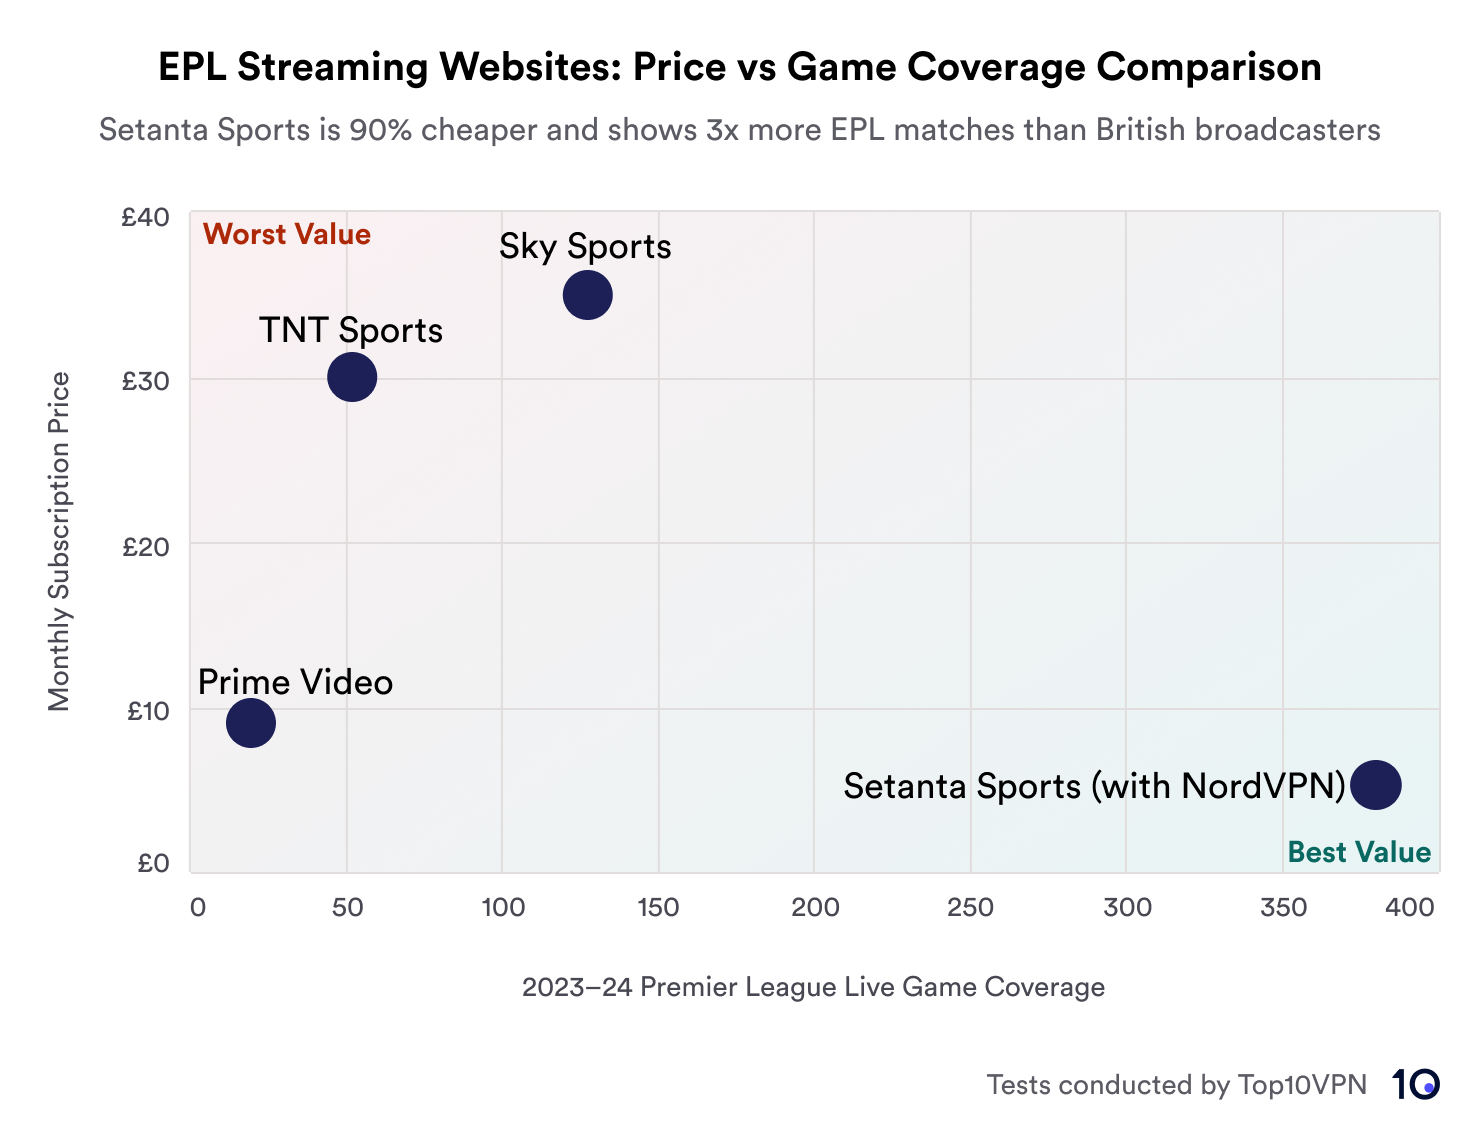 A scatter plot showing the monthly subscription price against the number of games shown by the following streaming services: Sky Sports, TNT Sports, Prime Video and Setanta Sports. Setanta sports is the best value for money showing 380 games for the monthly price of £5.33.